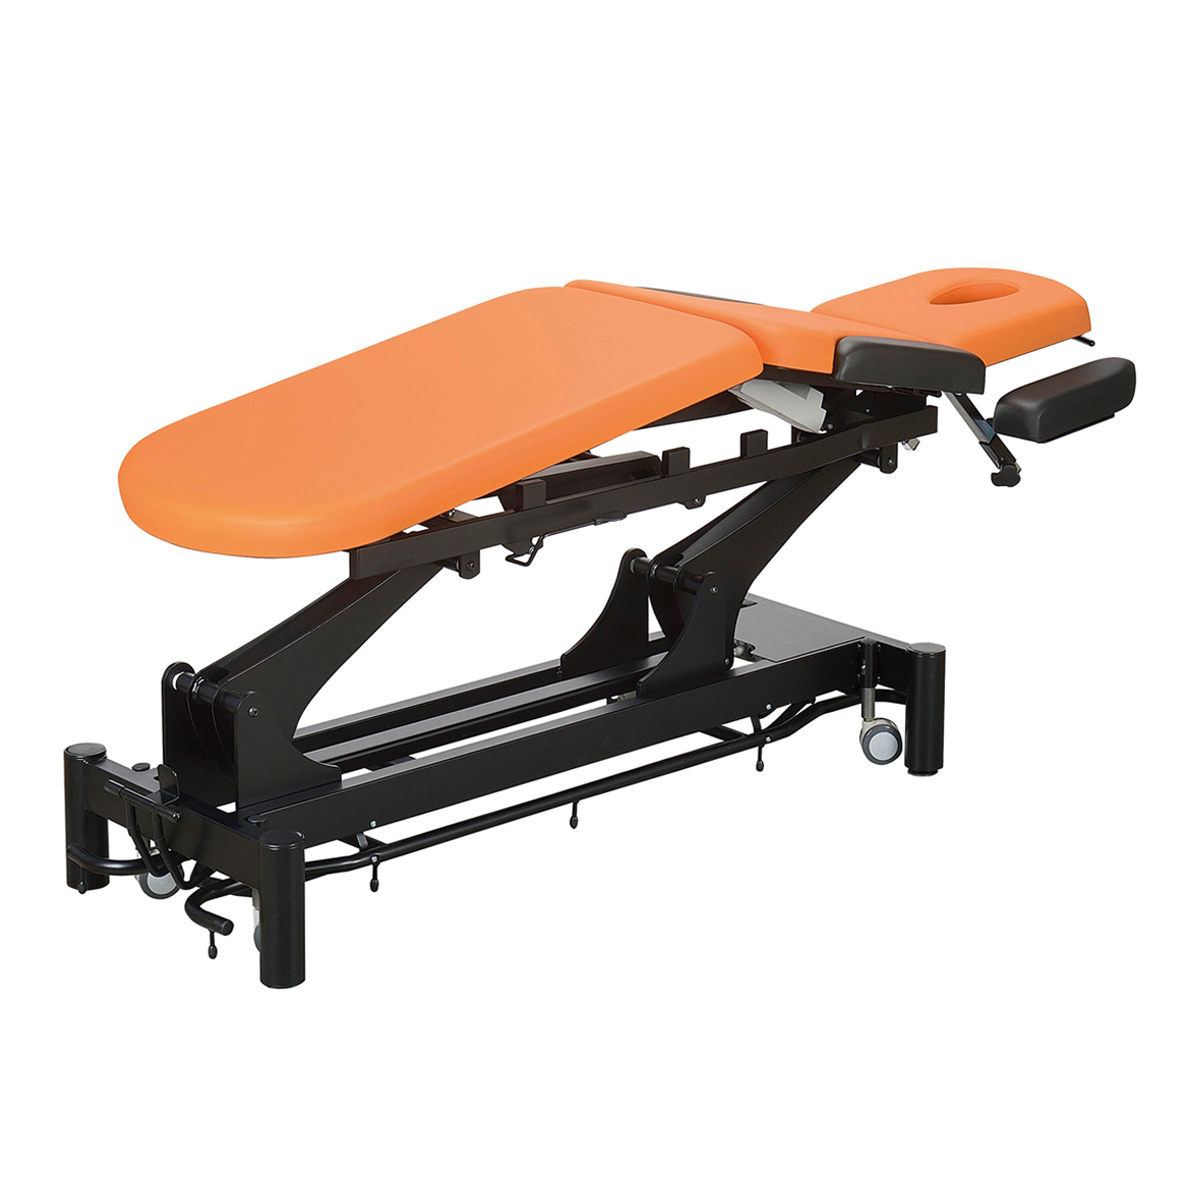 Physio/Osteo table 3 sections, with face hole, all around foot controller, 4 arm supports